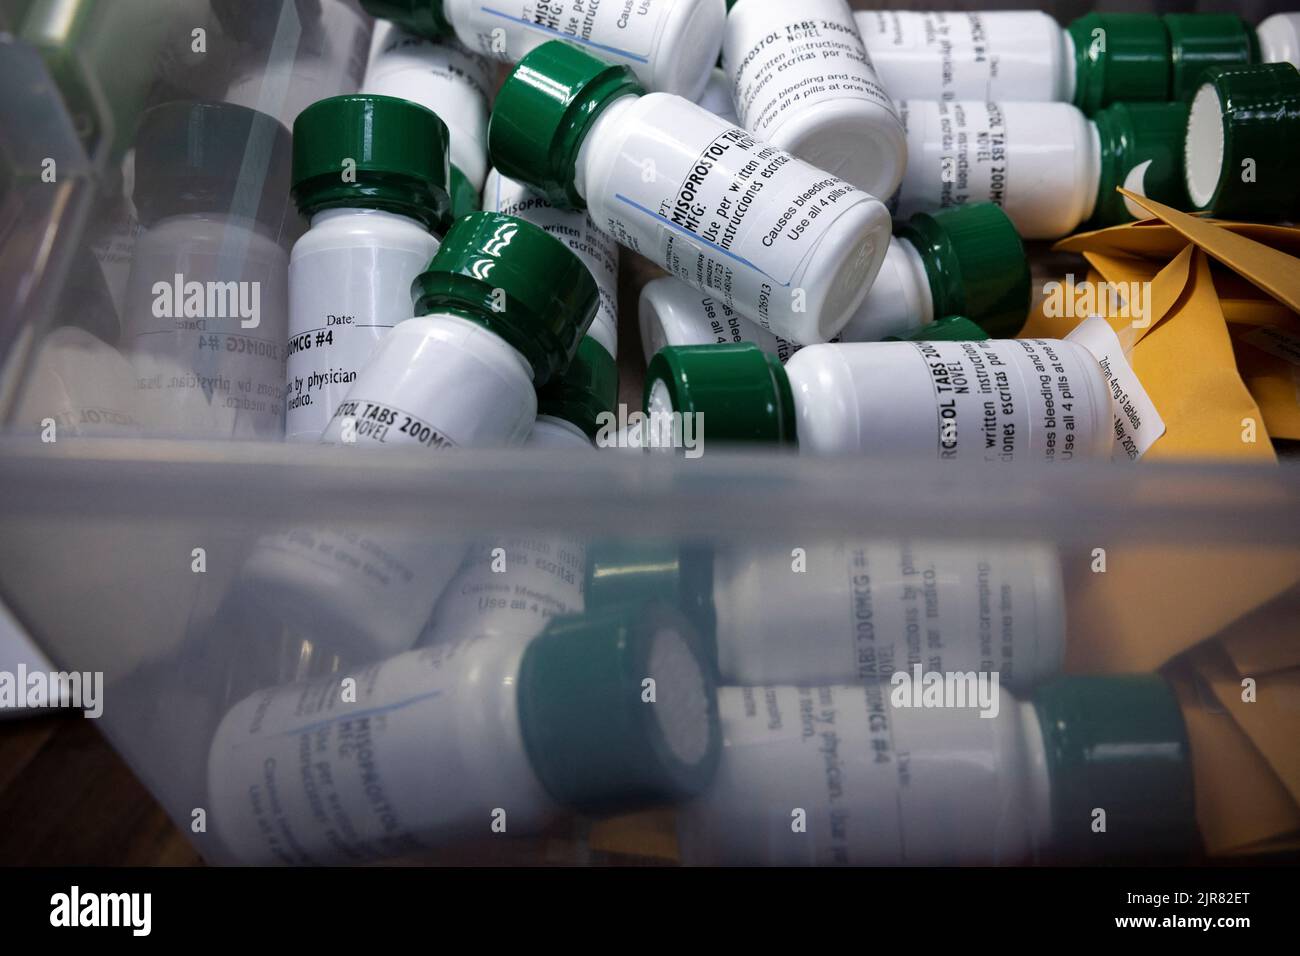 Bottles of Misoprostol, the second medication used in a medical abortion, lay unused in a storage bin at a Houston abortion clinic which stopped providing abortions when the U.S. Supreme Court overturned Roe v. Wade, in Texas, U.S., July 7, 2022. REUTERS/Evelyn Hockstein Stock Photo